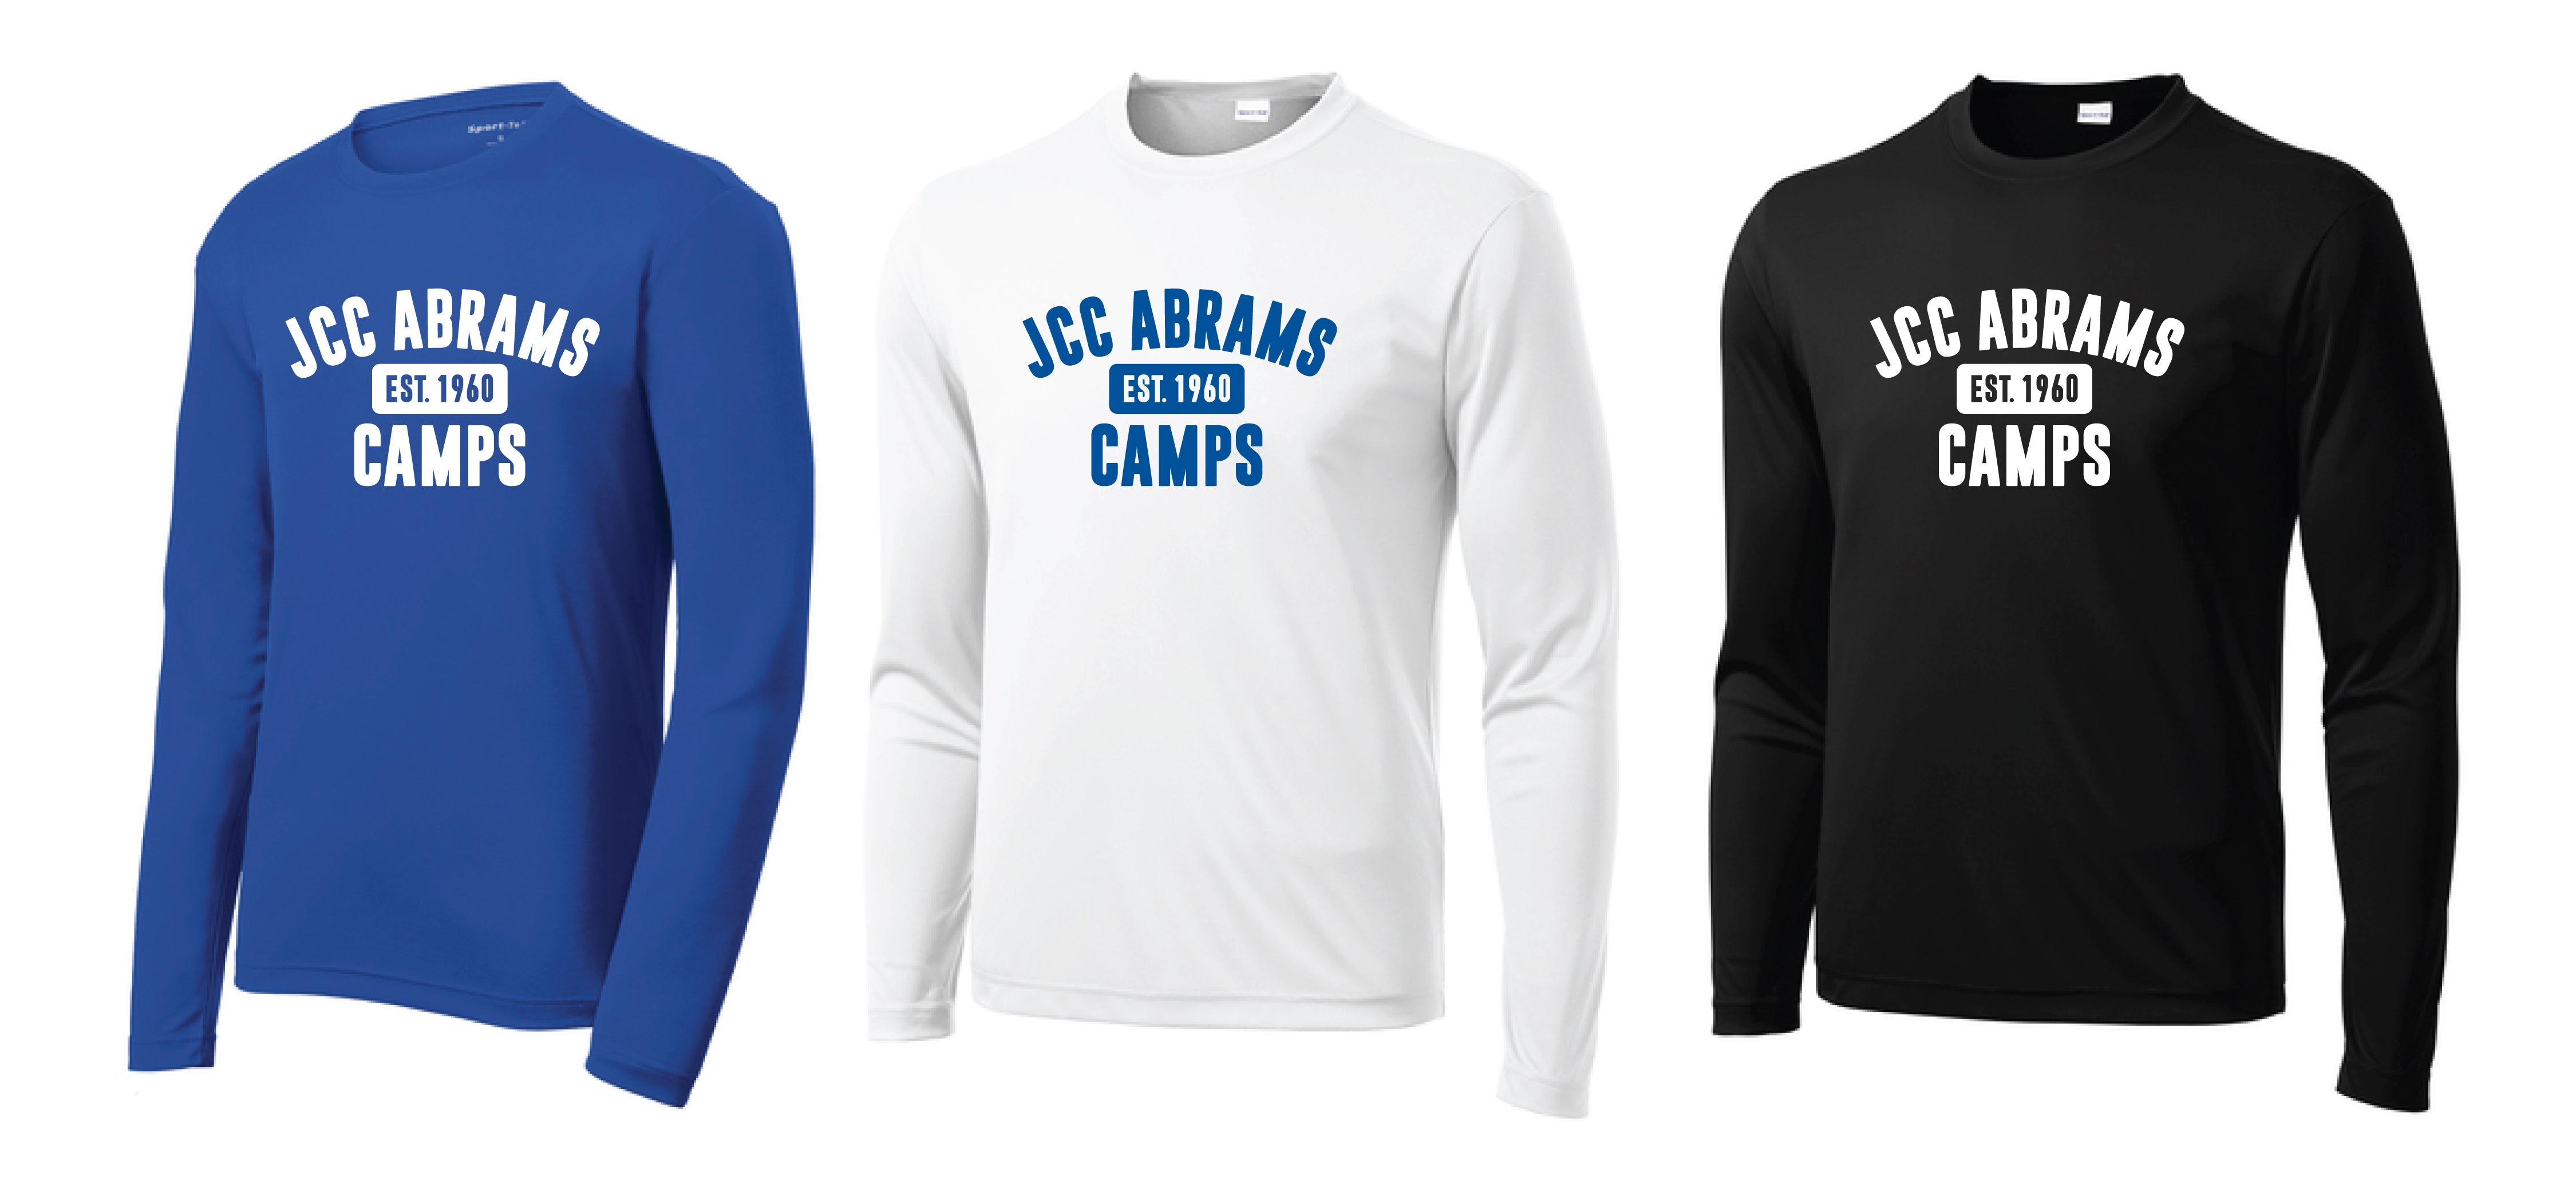 Long Sleeve Performance Shirt - Adult Unisex and Youth